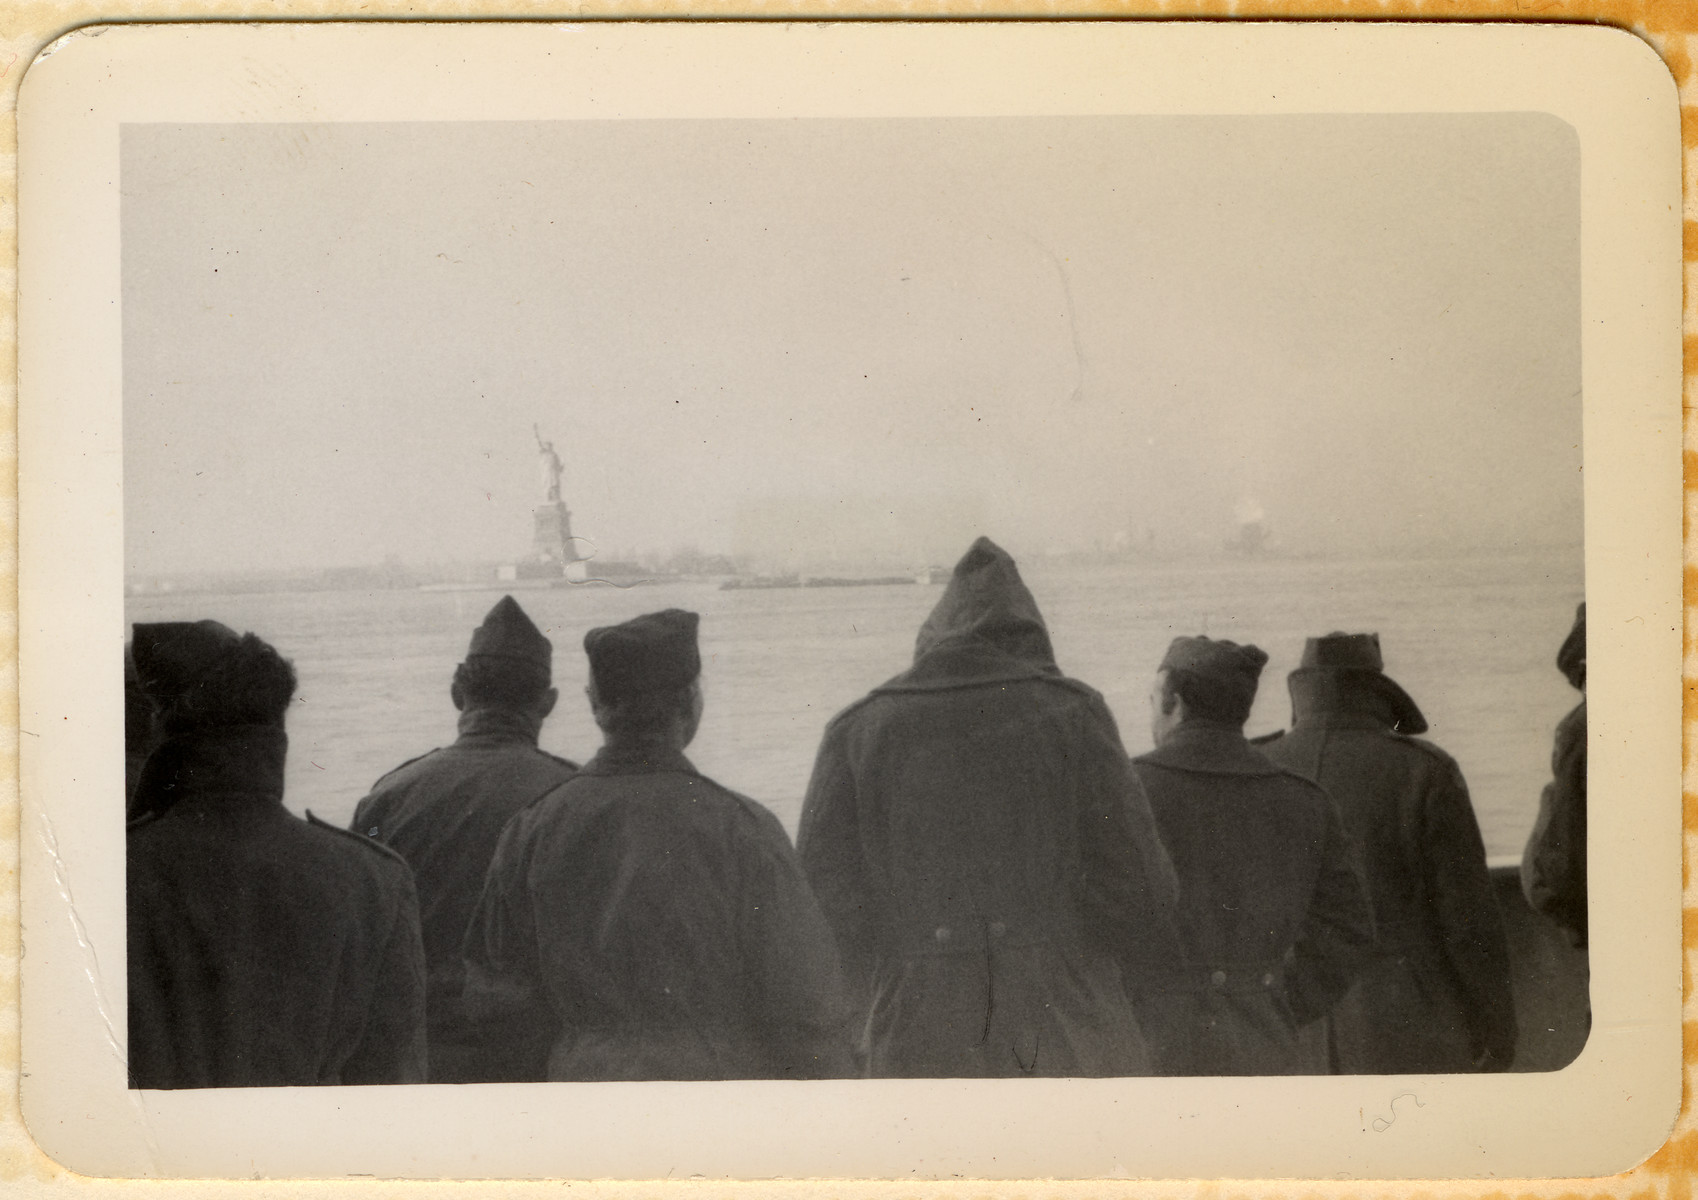 American GIs stand on the deck of their troop ship and look at the Statue of Liberty as they pull into NY harbor on their return home from World War II.